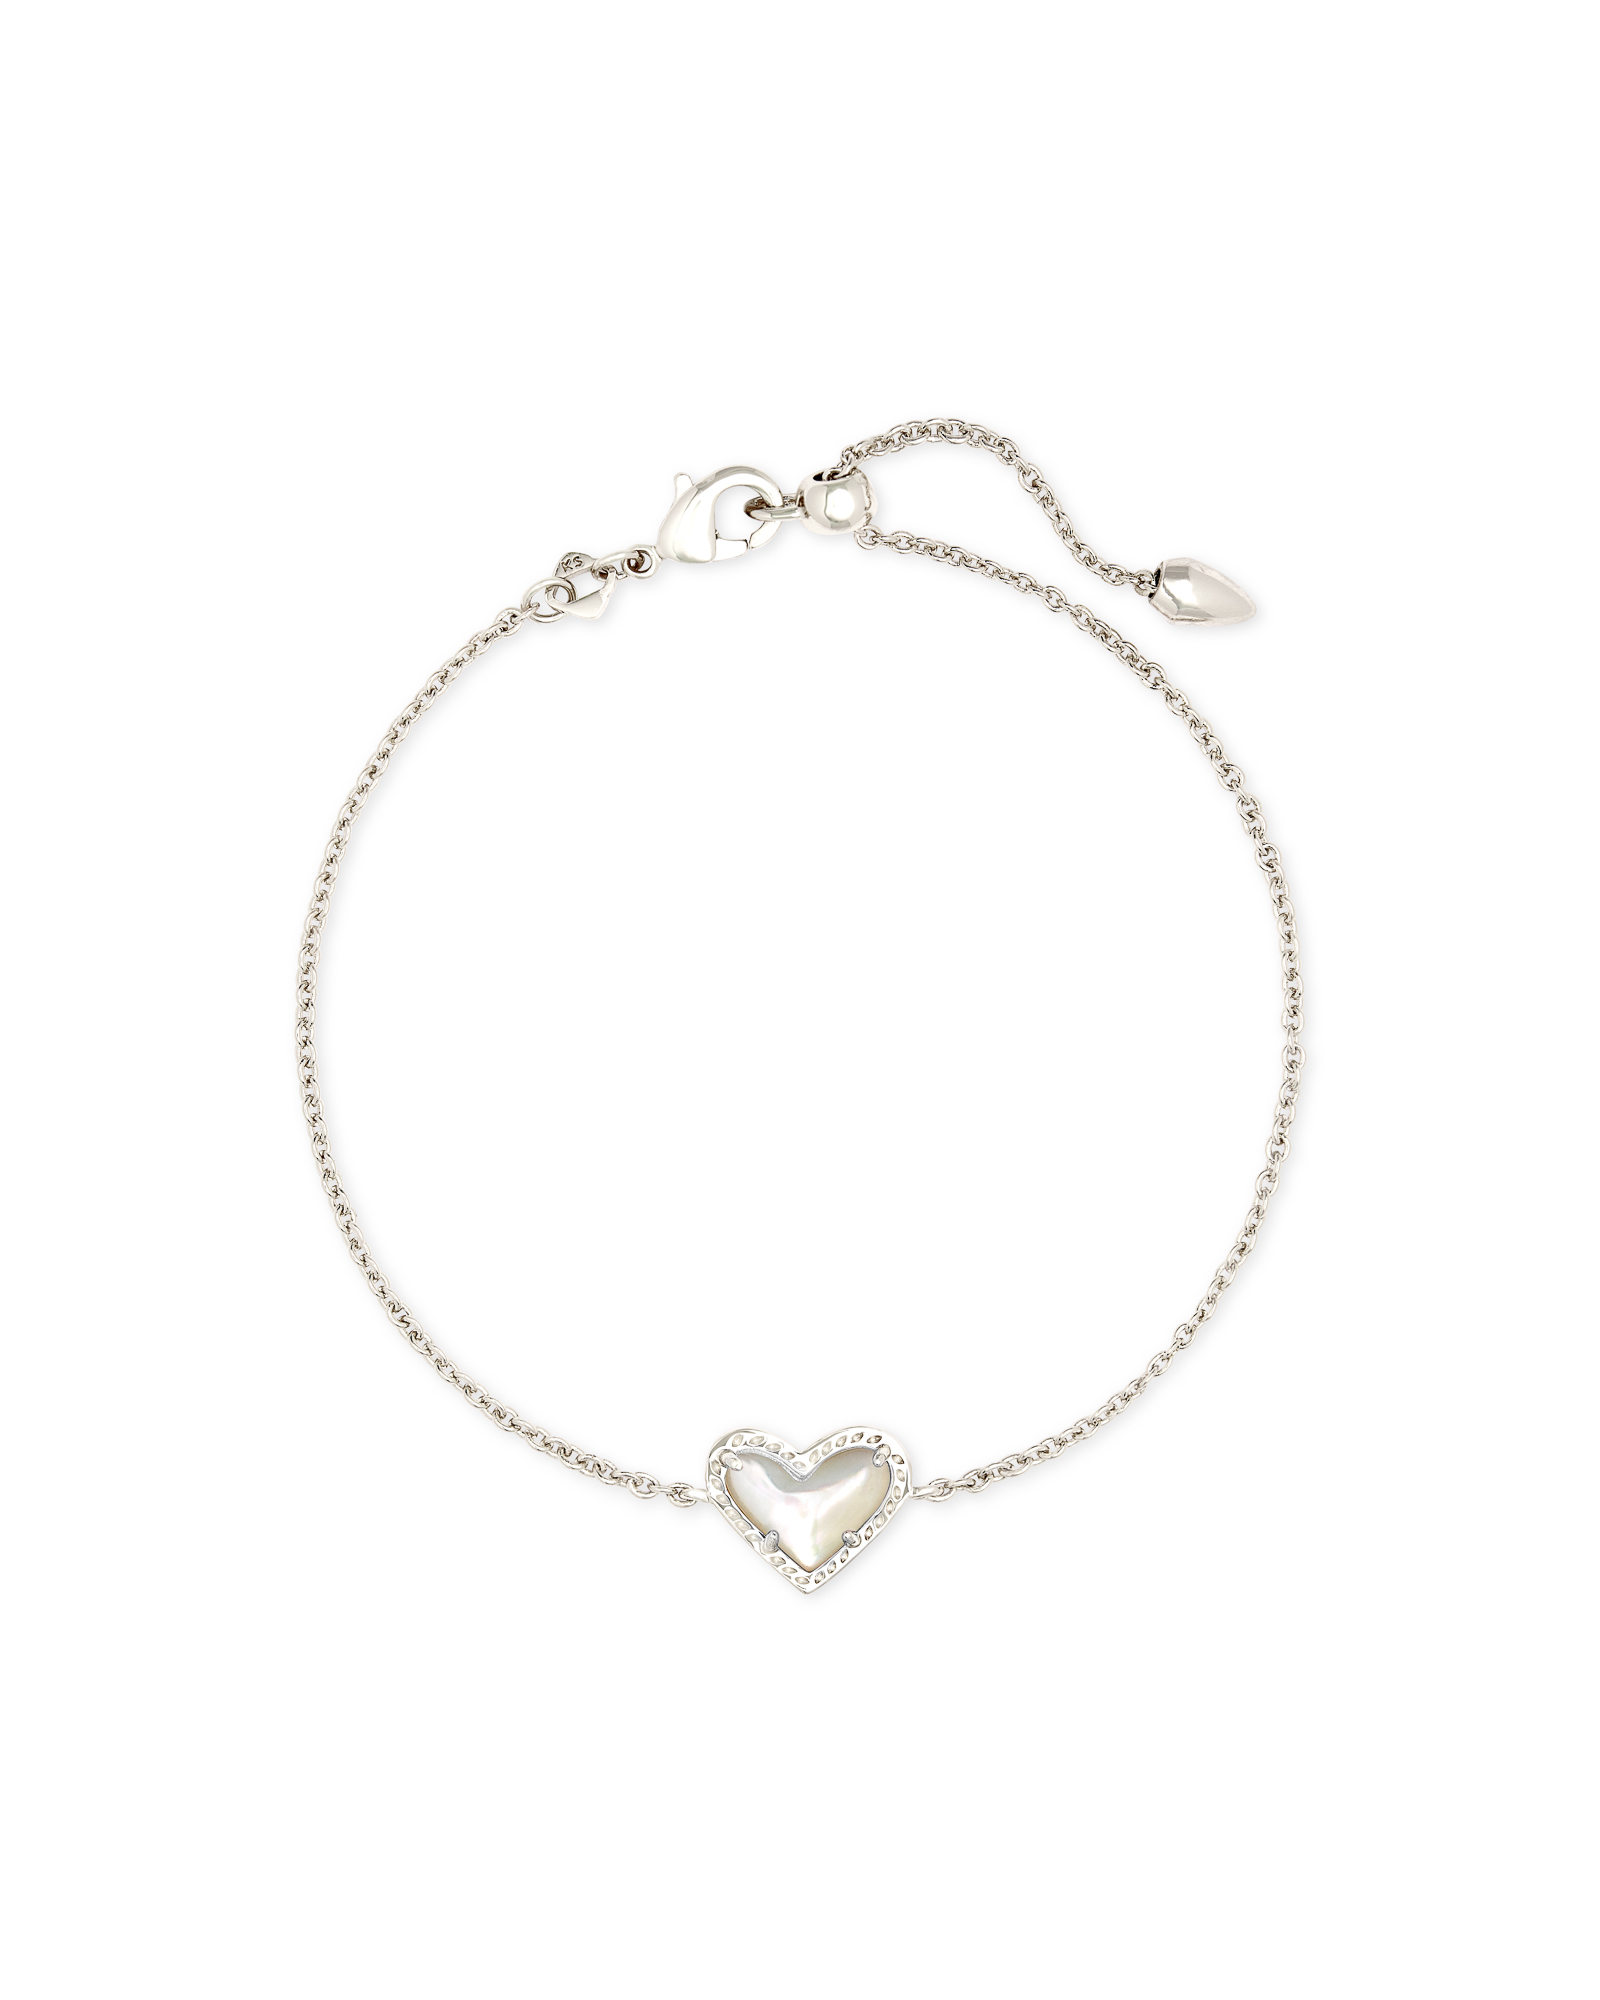 Silver Bracelet With Two Hearts And Engraving - Personalised Name Bracelets,  HD Png Download , Transparent Png Image - PNGitem